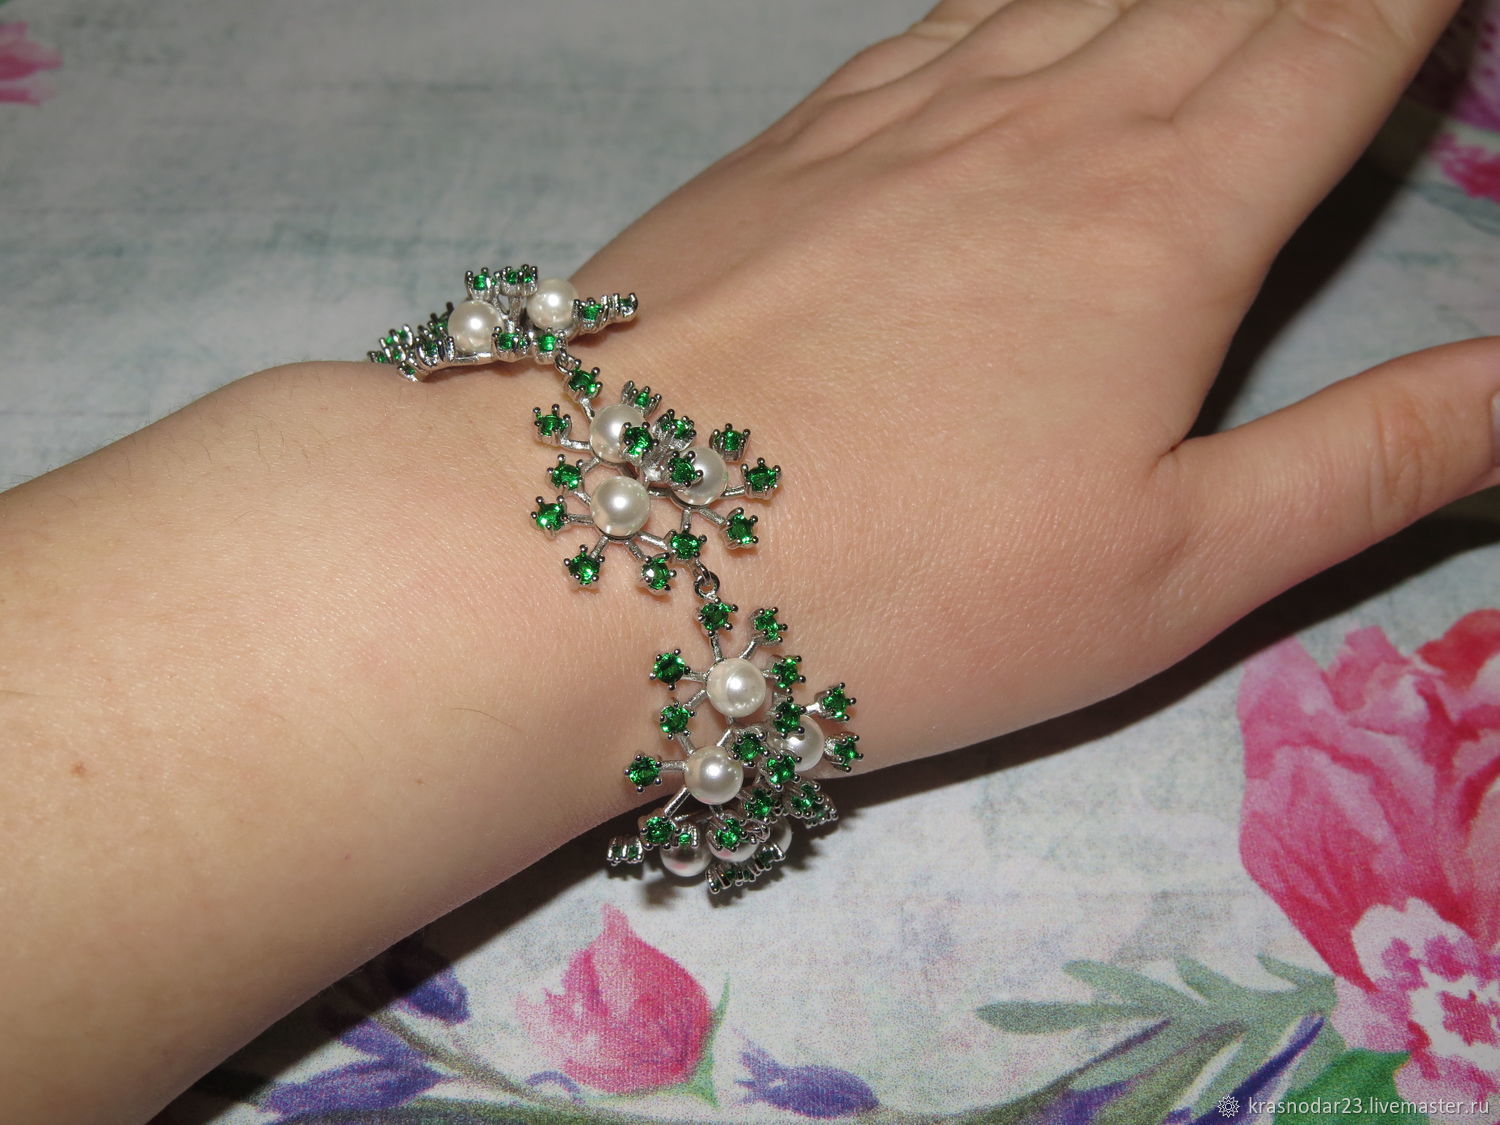 Bracelet in SILVER 925 coated with rhodium (that was always great-shiny and bright), decorated with chrome diopside and natural white pearls
